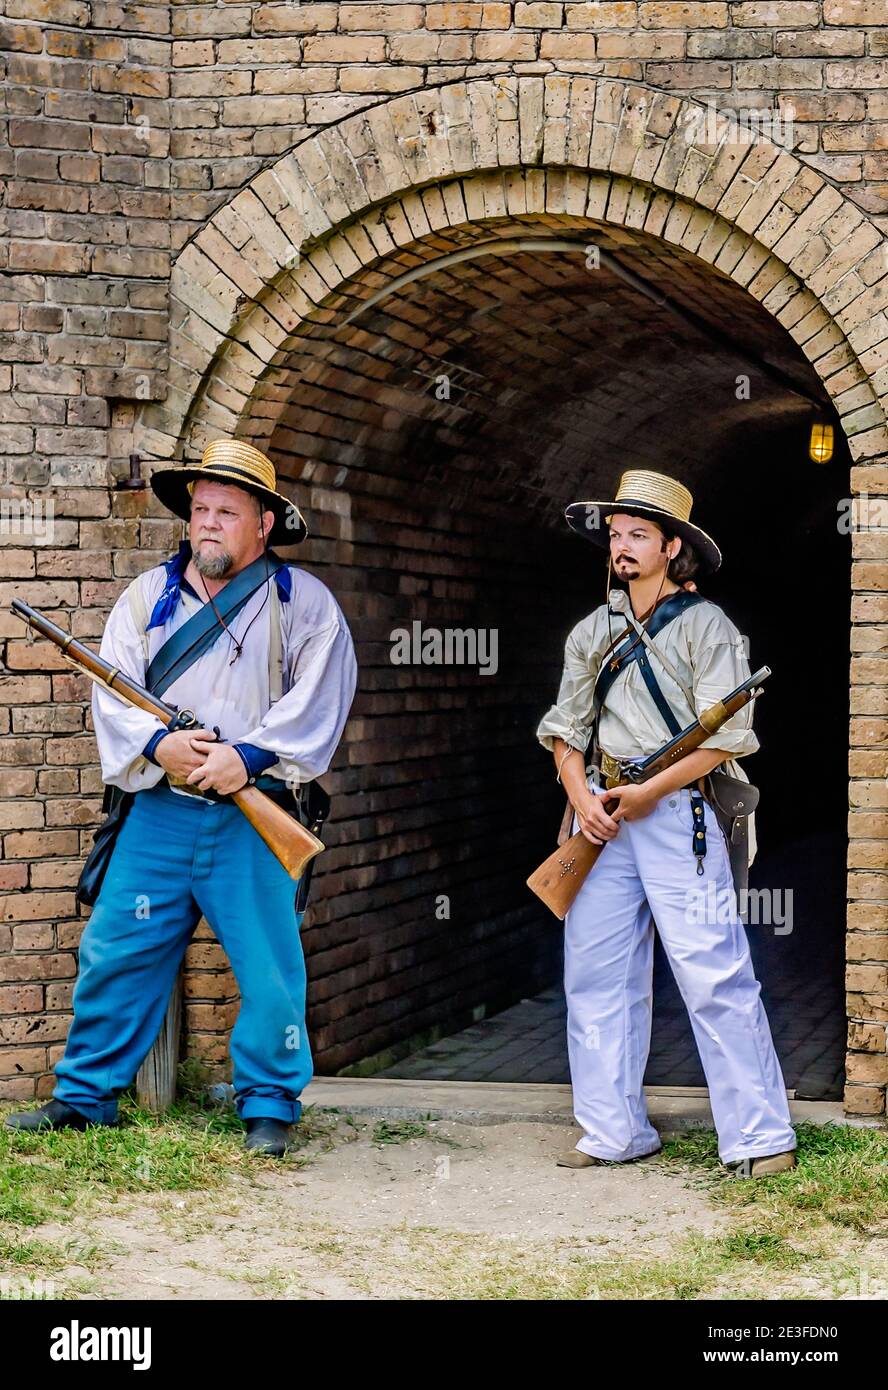 Civil War reenactors stand in the courtyard at Fort Gaines during a reenactment of the 150th Battle of Mobile Bay in Dauphin Island, Alabama. Stock Photo